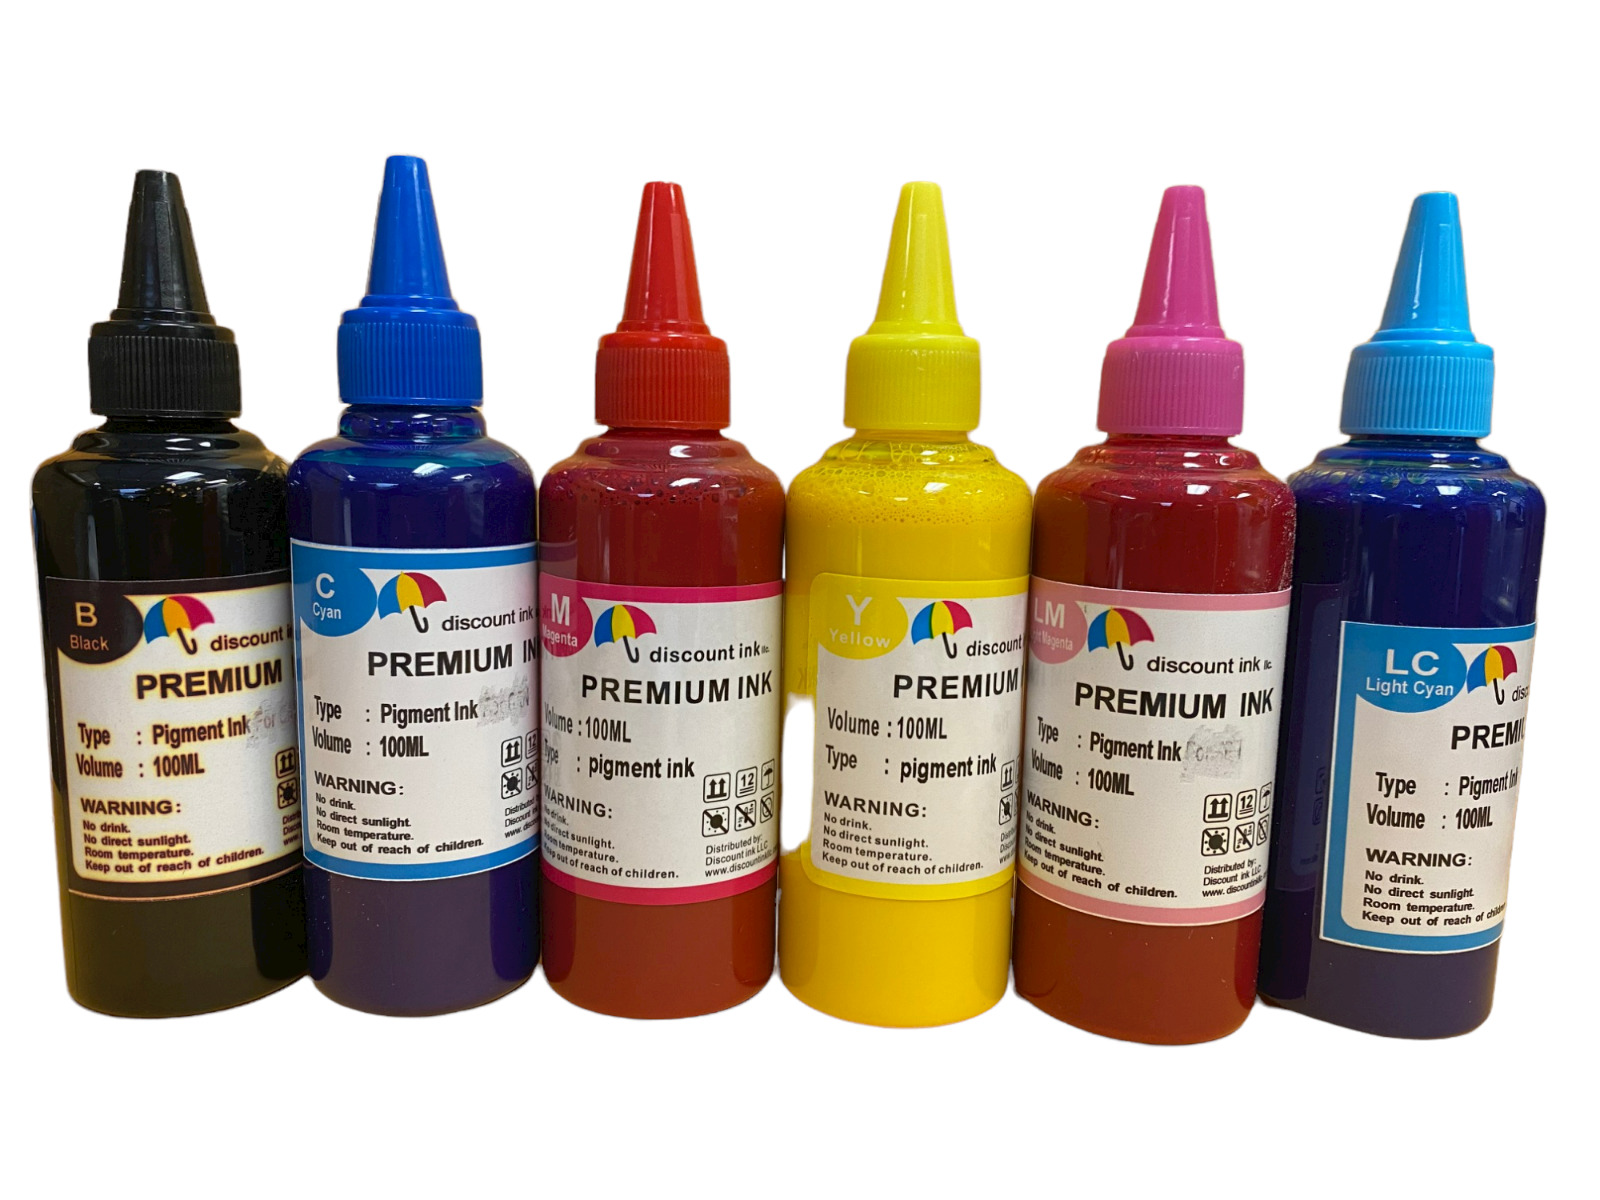 6 Bulk refill ink for Epson inkjet 6 colors 6x100ml BK/C/M/Y/LC/LM Pigment